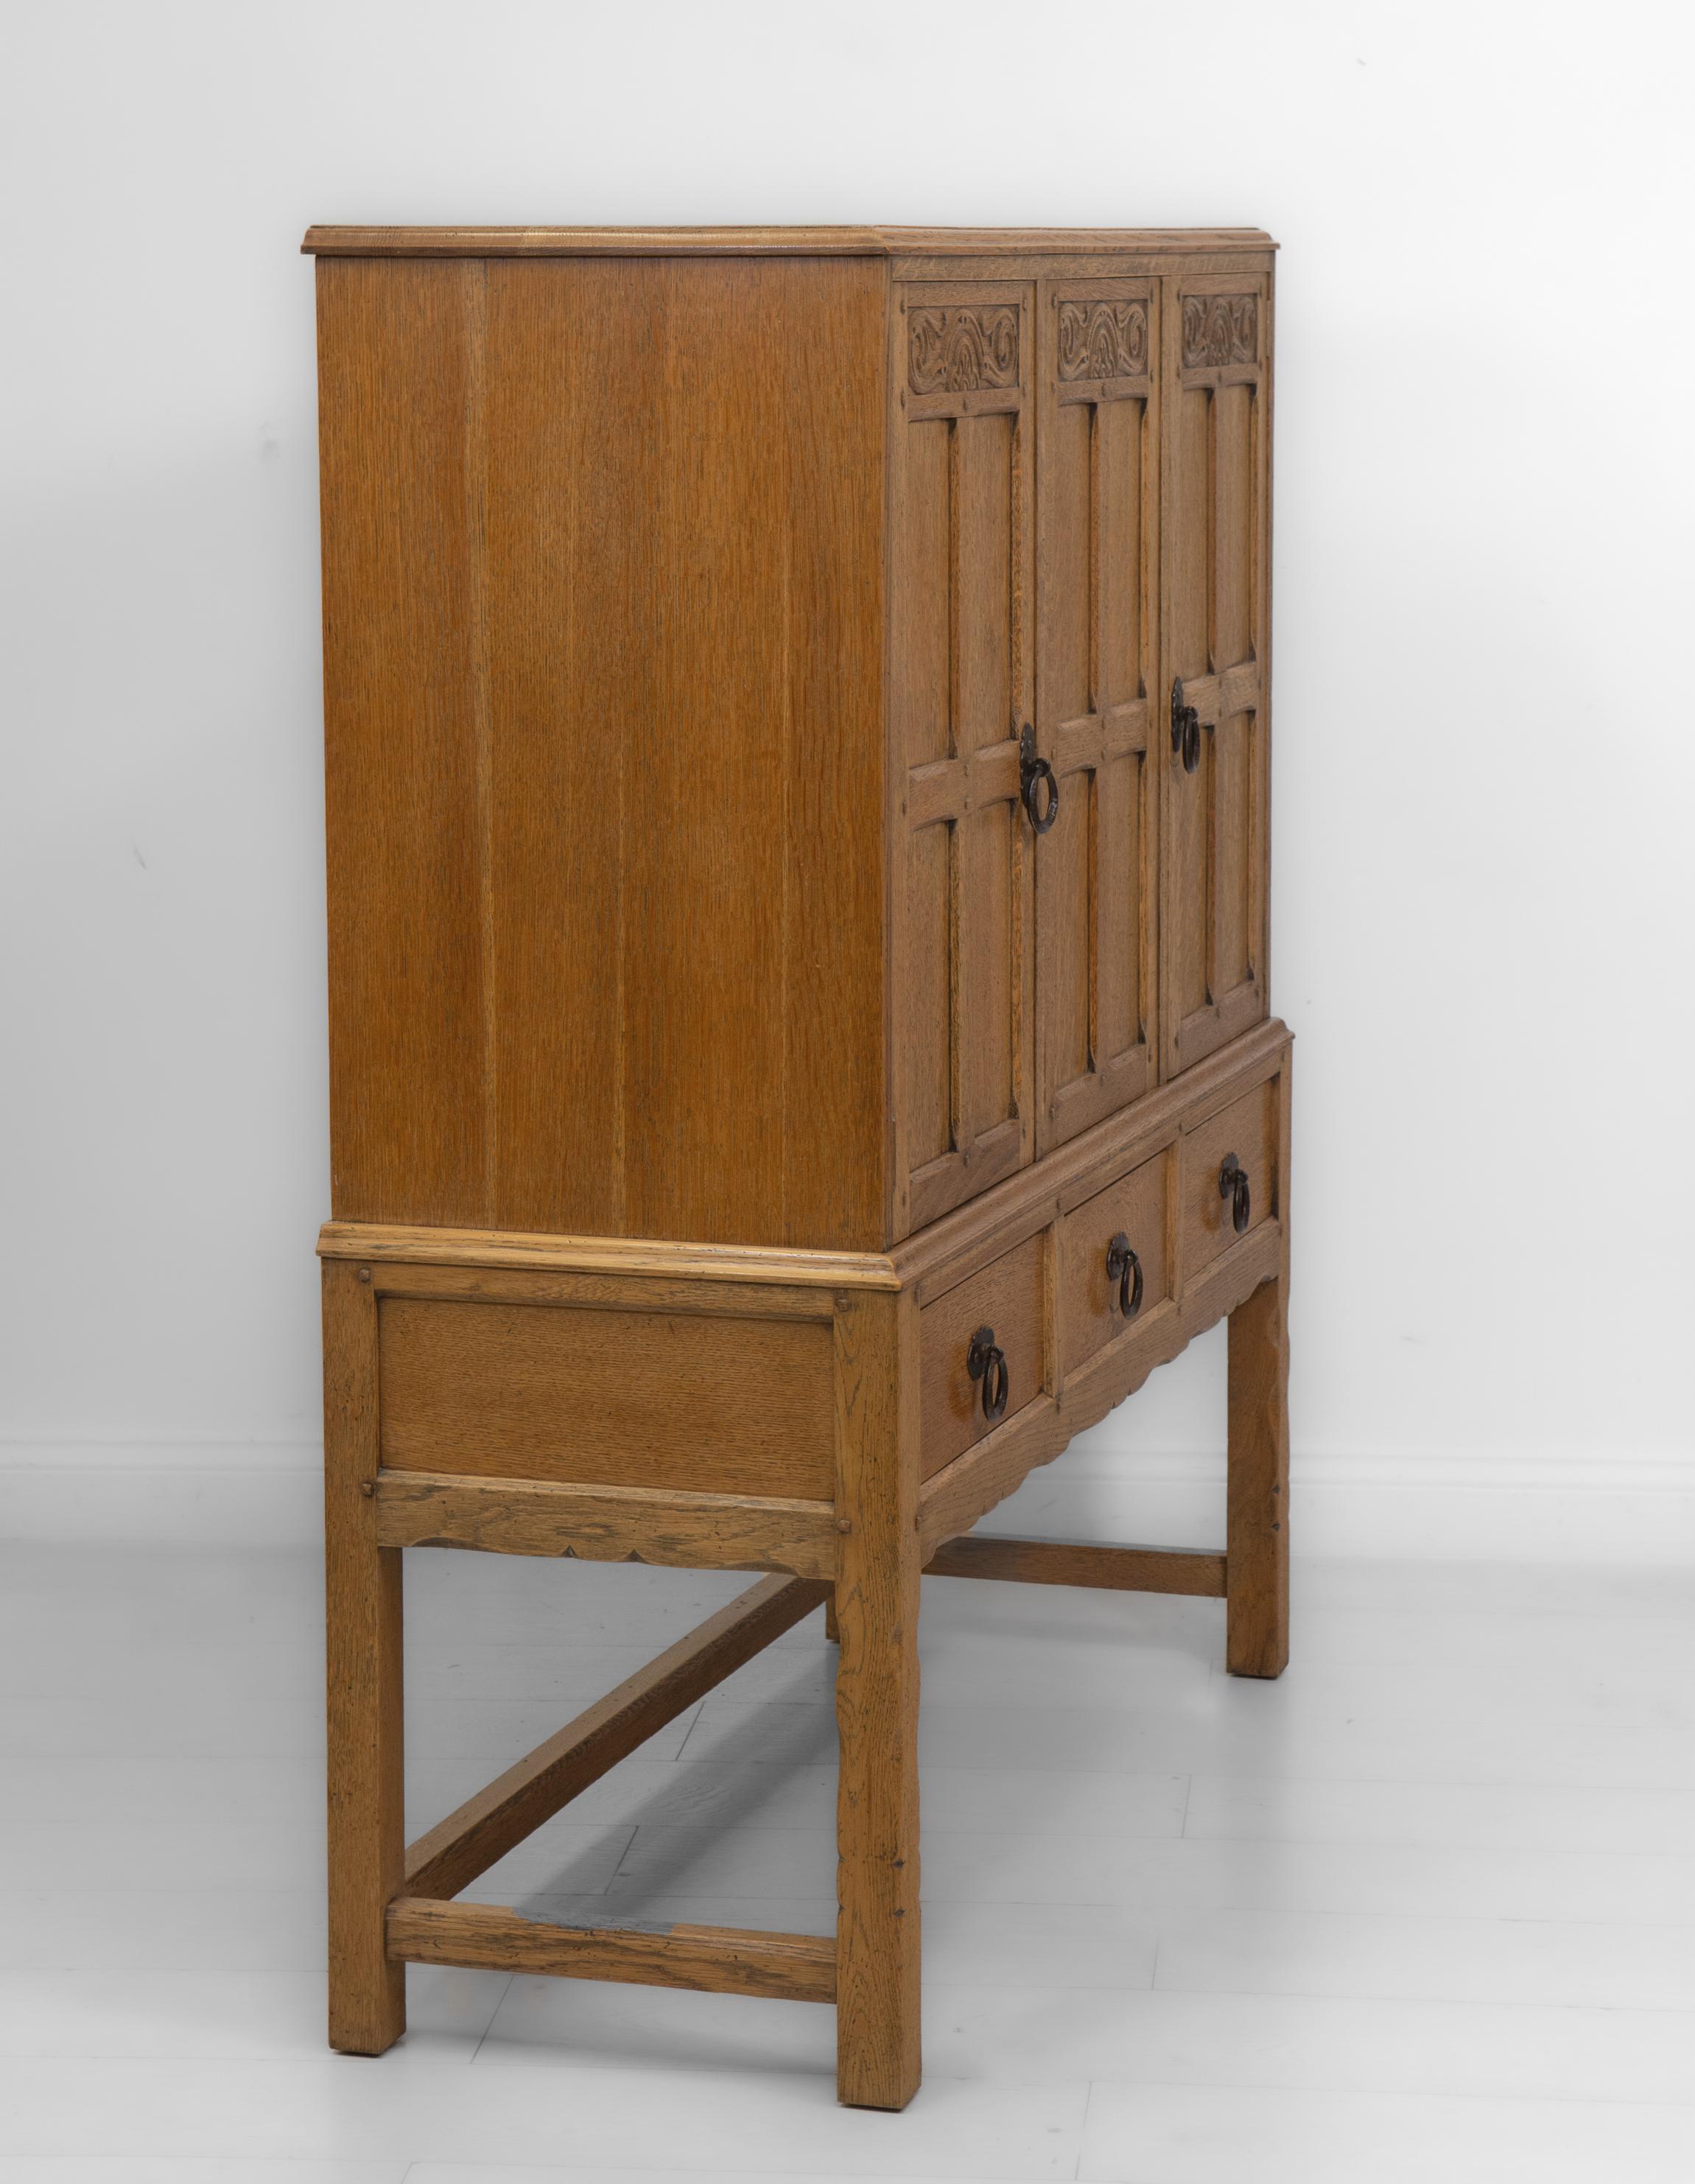 Waring & Gillow Oak Cotswold School Manner Arts And Crafts Cabinet Circa 1920 3